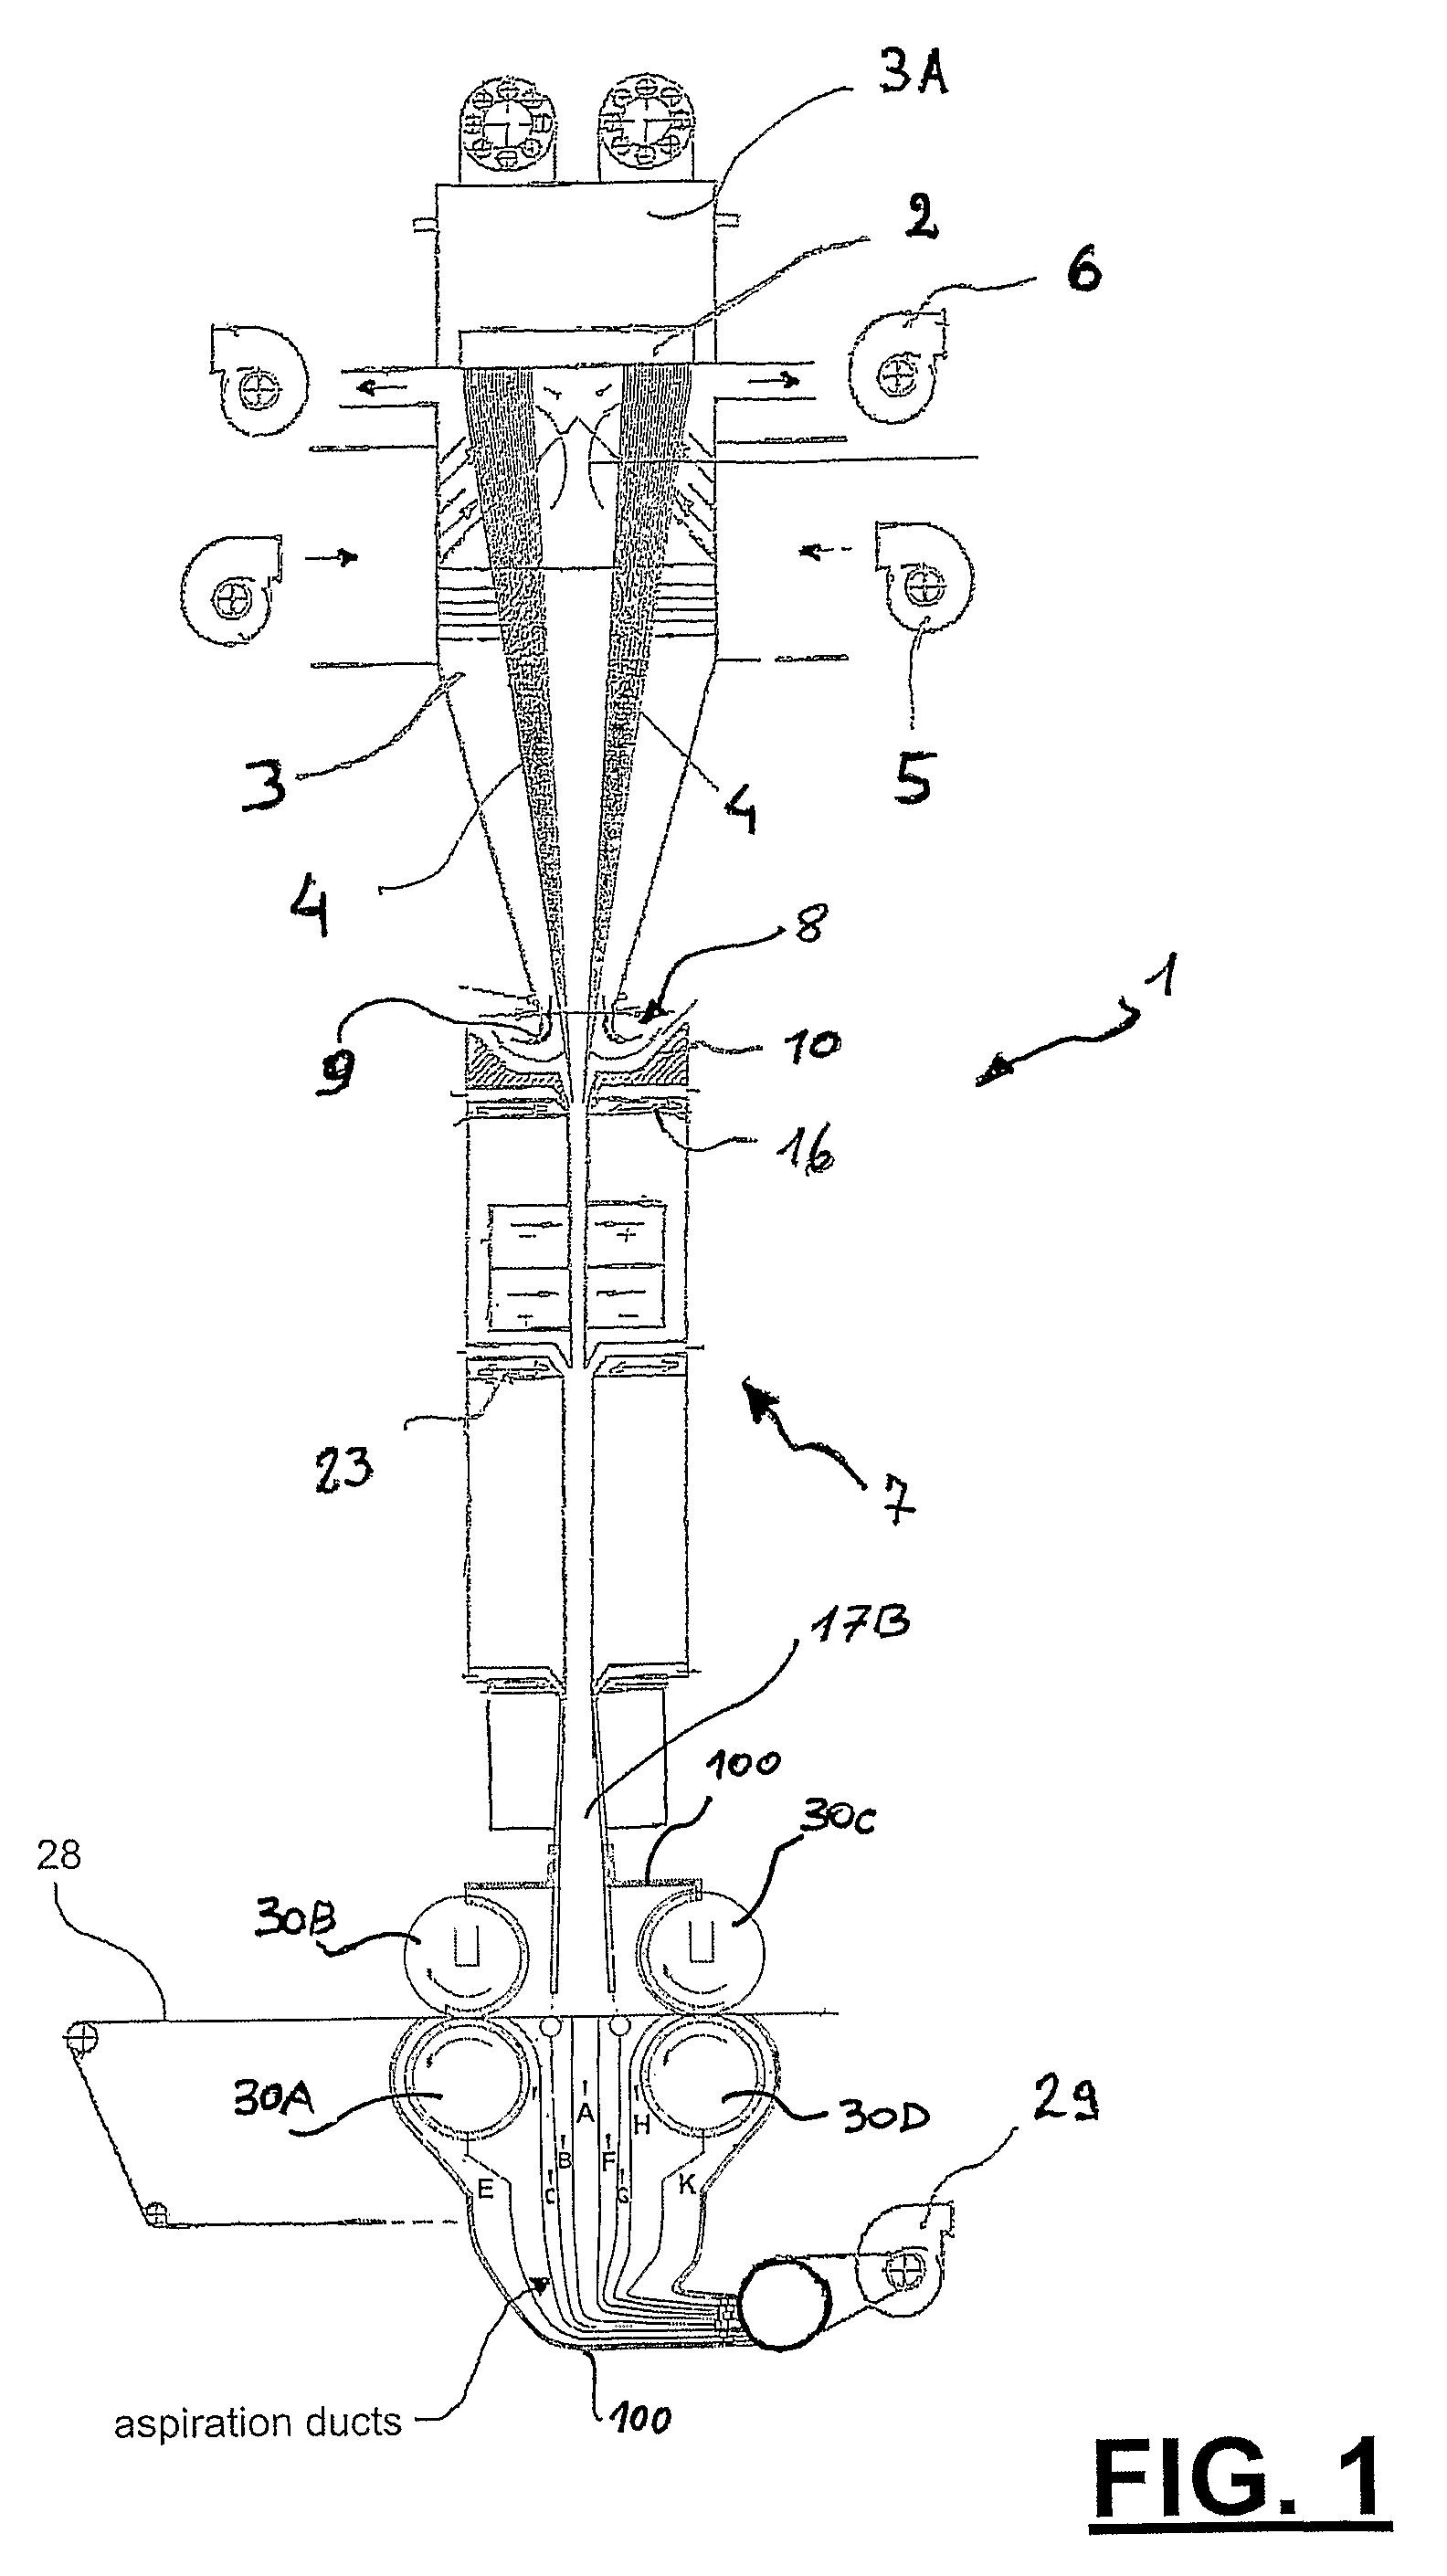 Apparatus and process for the production of a non-woven fabric